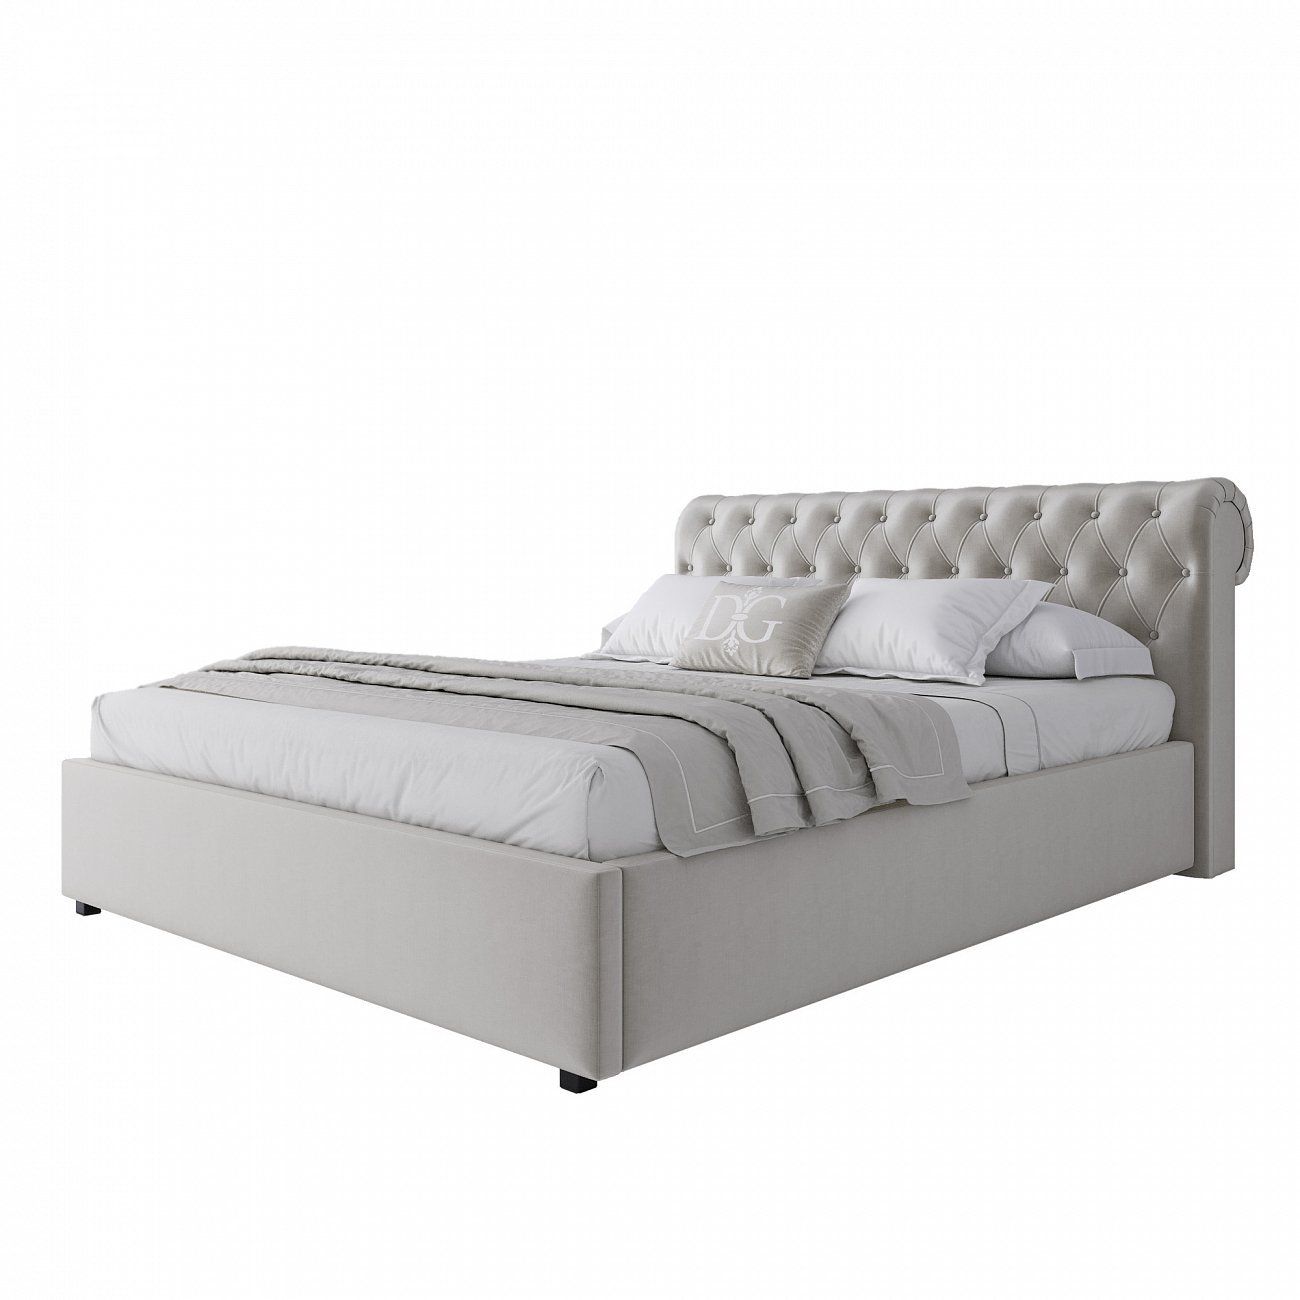 Double bed with upholstered headboard 160x200 cm milk Sweet Dreams